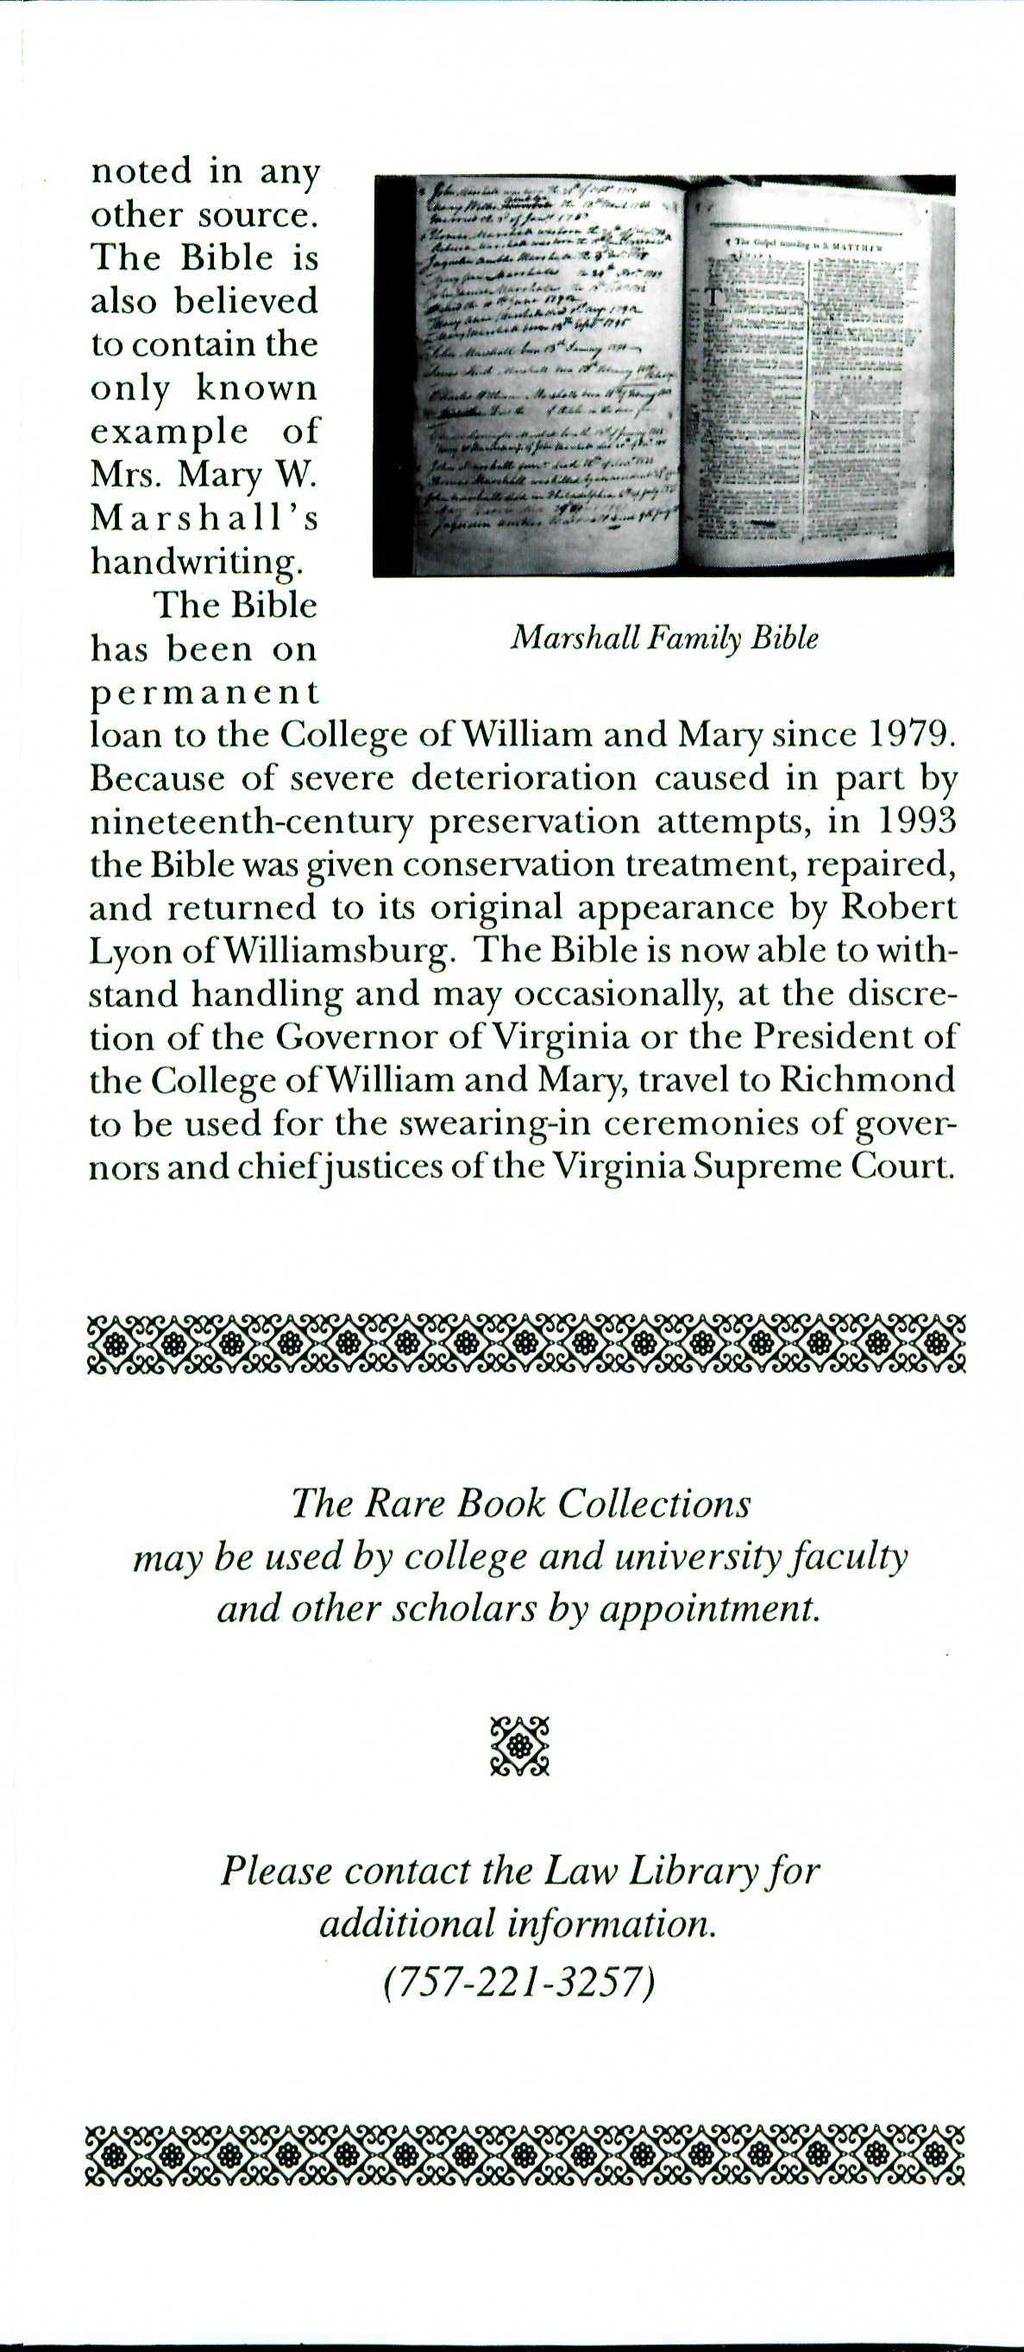 noted in any other source. The Bible is also believed to contain the only known example of Mrs. Mary W. Marshall's handwriting.